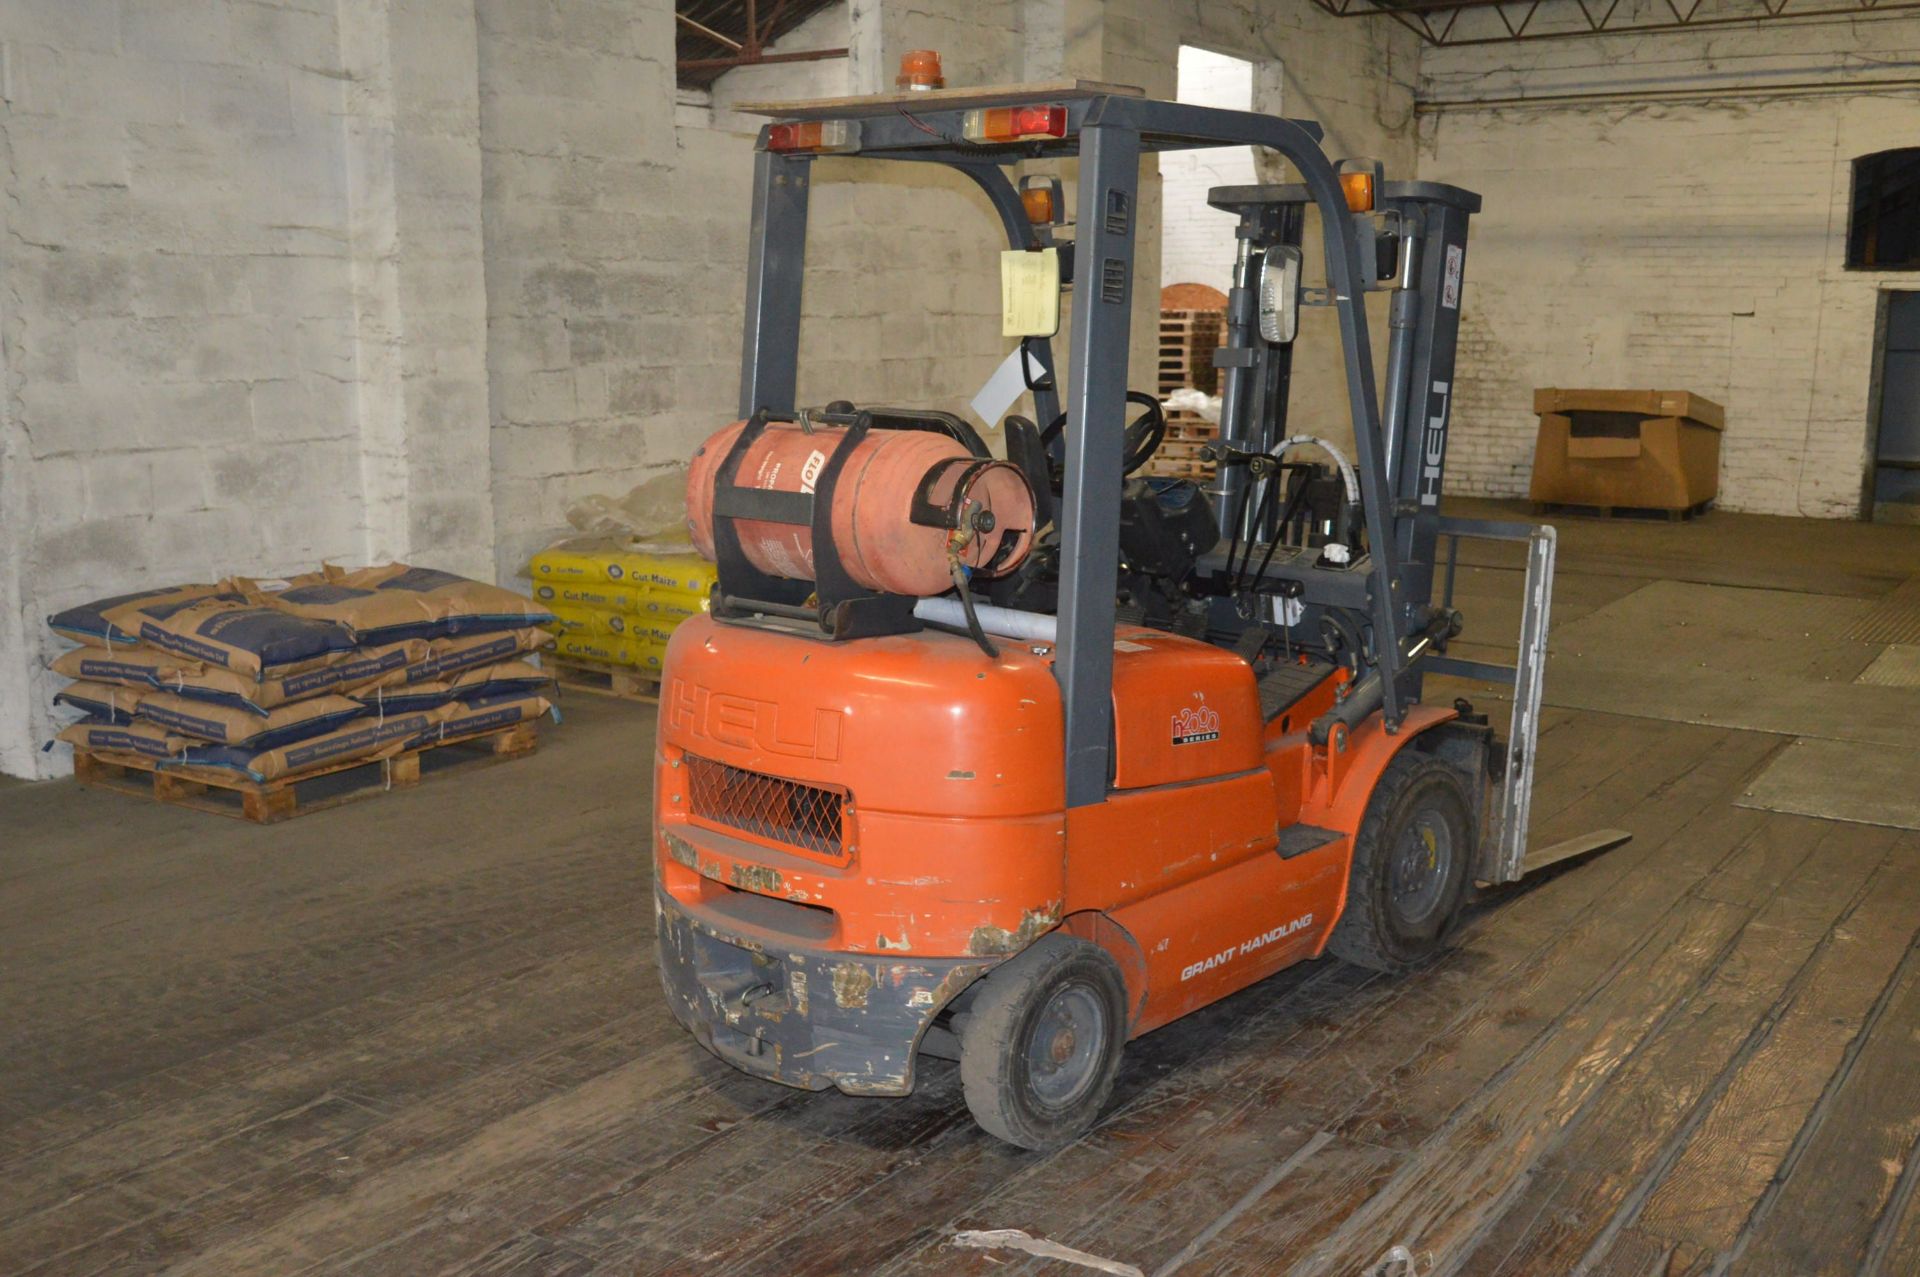 Heli HFG15 H2000 SERIES 1500kg LPG ENGINE FORK LIFT TRUCK, serial no. 78330, year of manufacture - Image 4 of 5